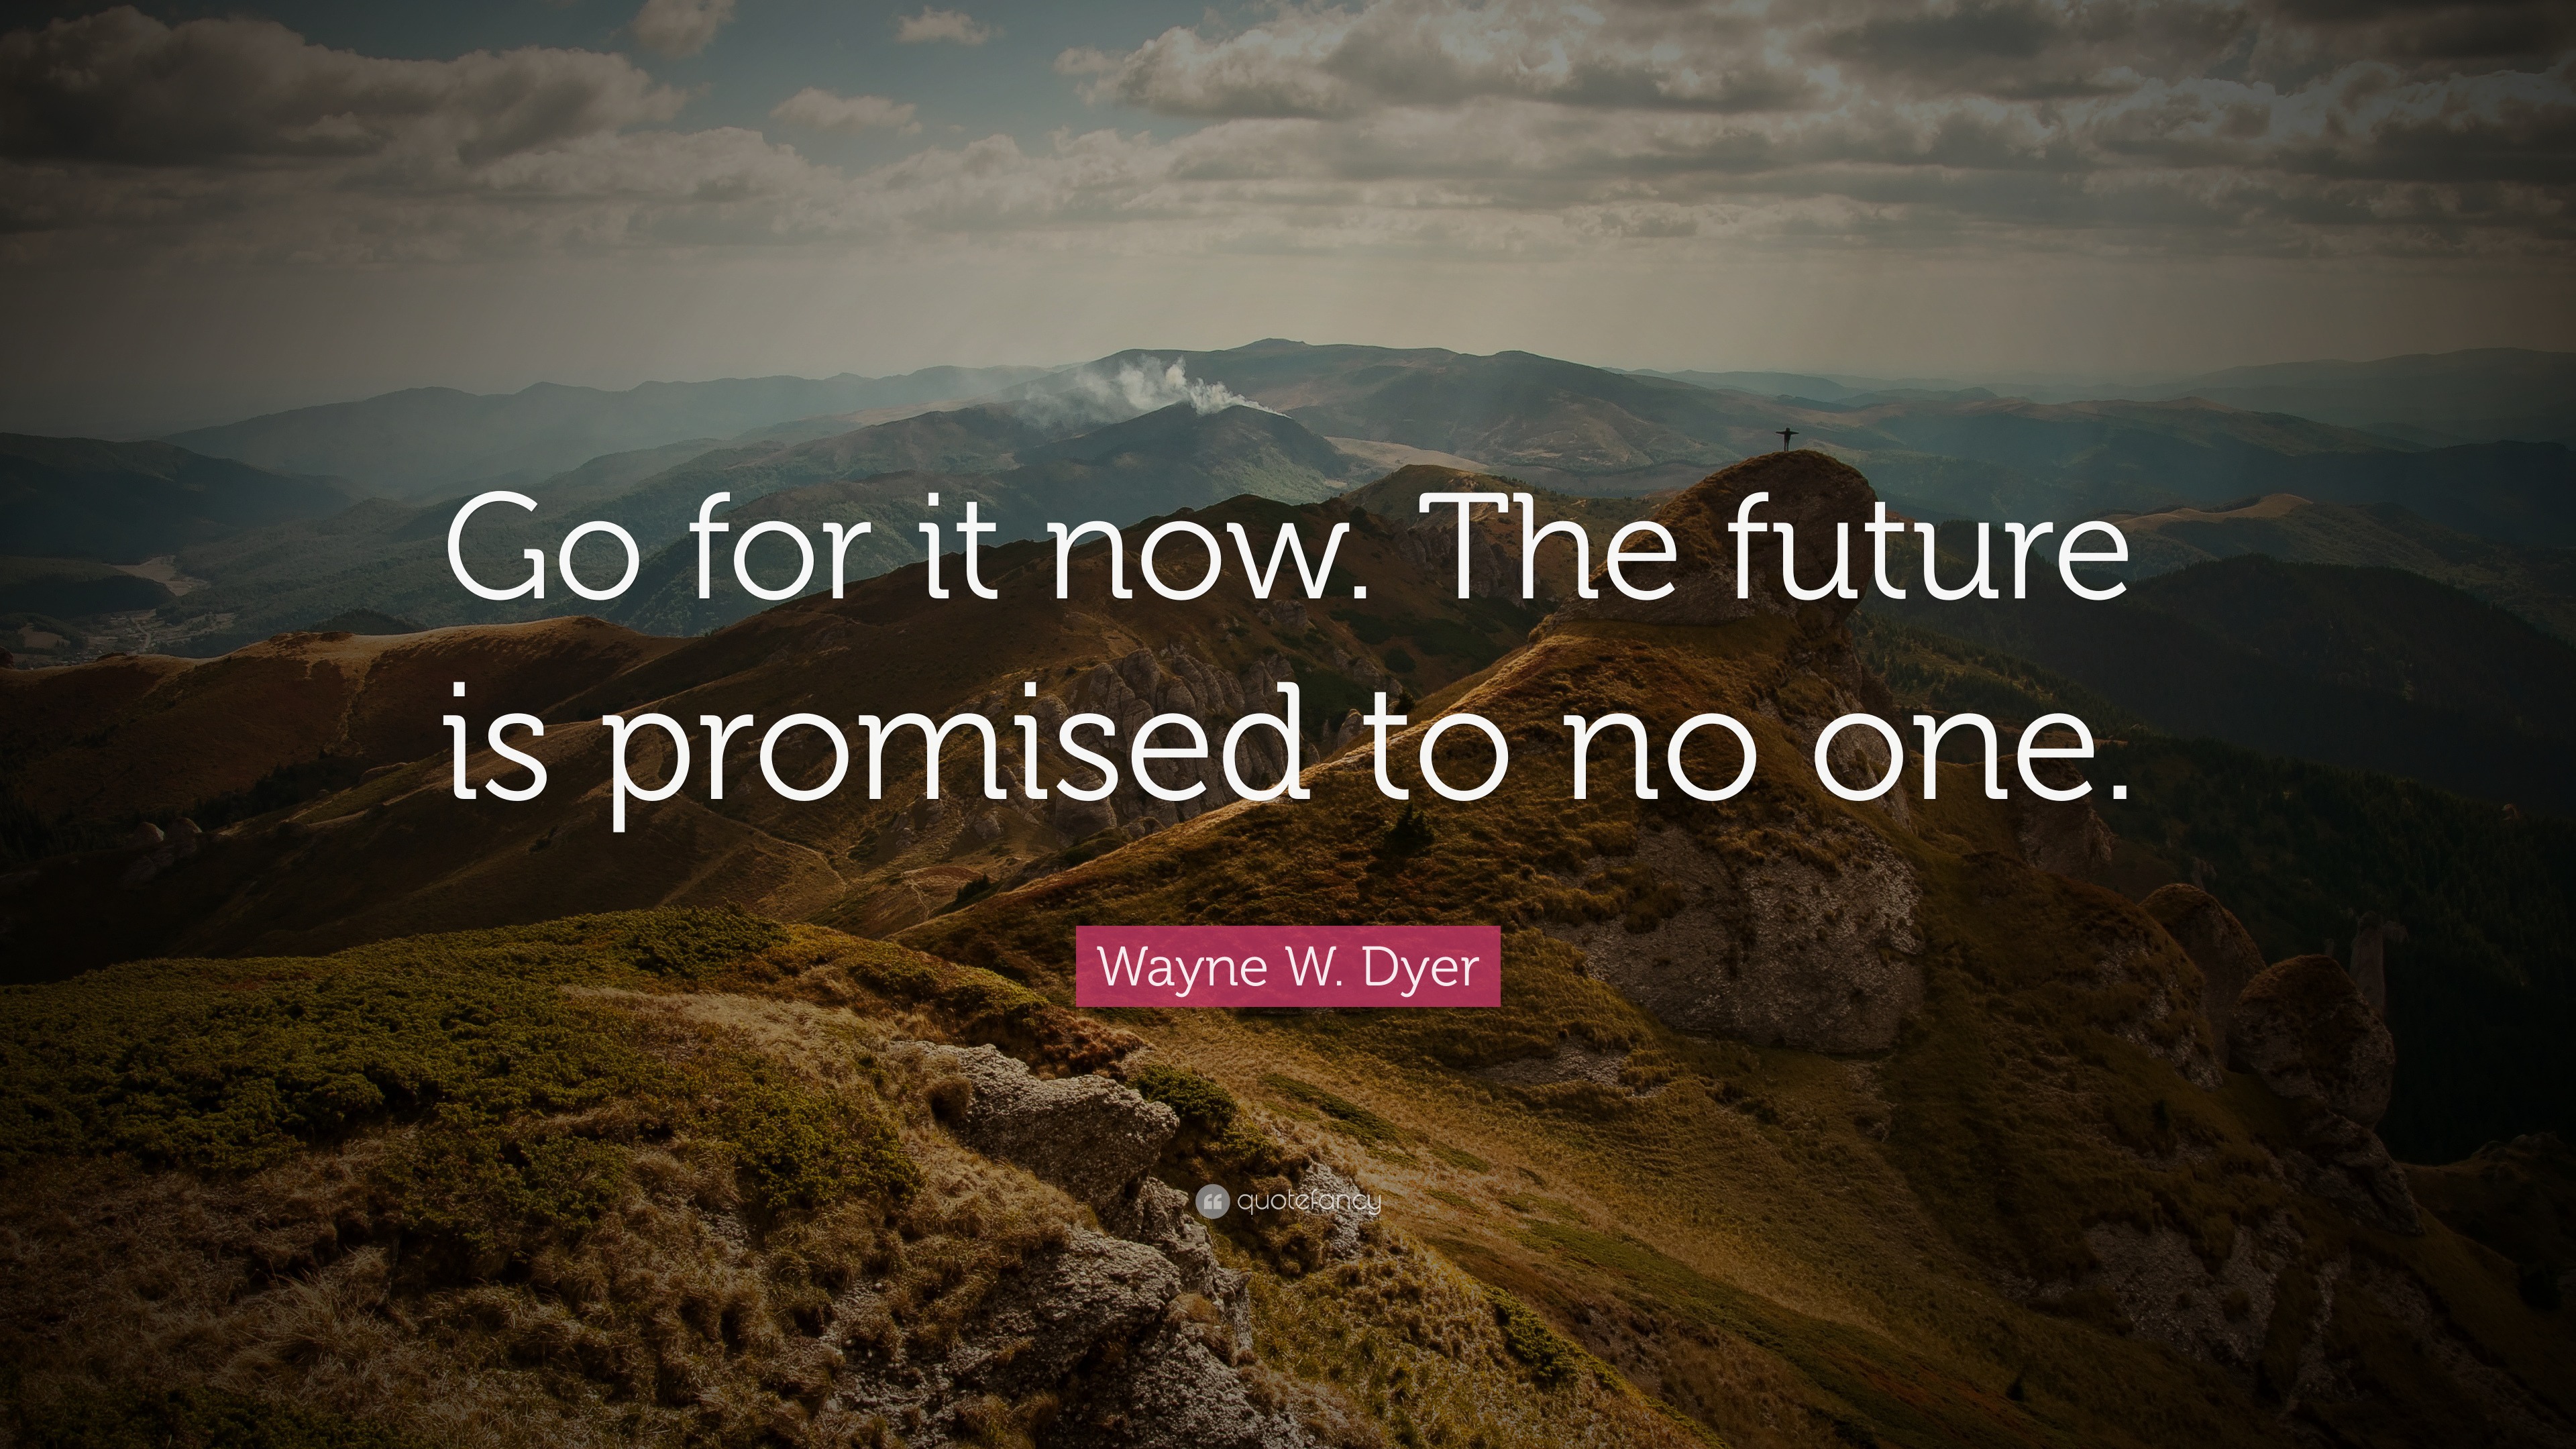 Wayne W. Dyer Quote: “Go for it now. The future is promised to no one